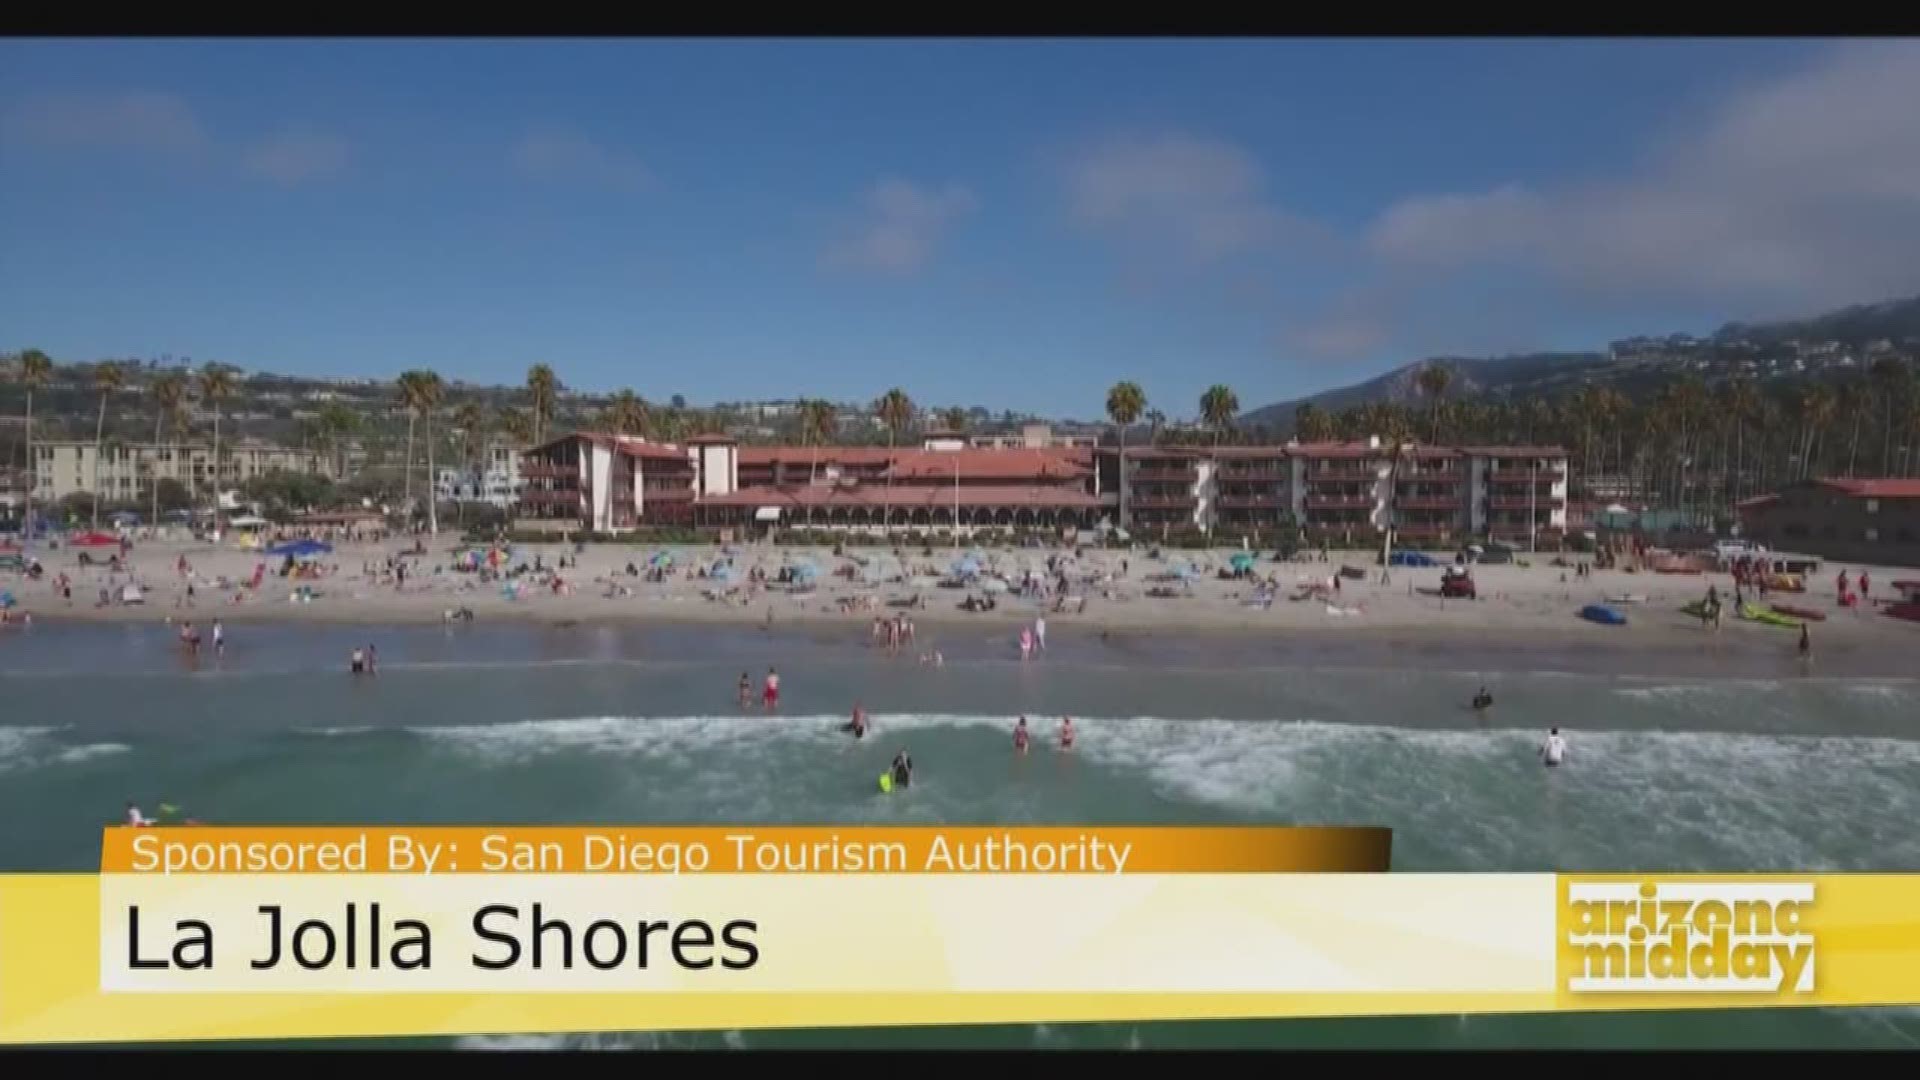 San Diego is one of Arizona's hottest vacation spots, and La Jolla Shores is a great place to stay when you go!